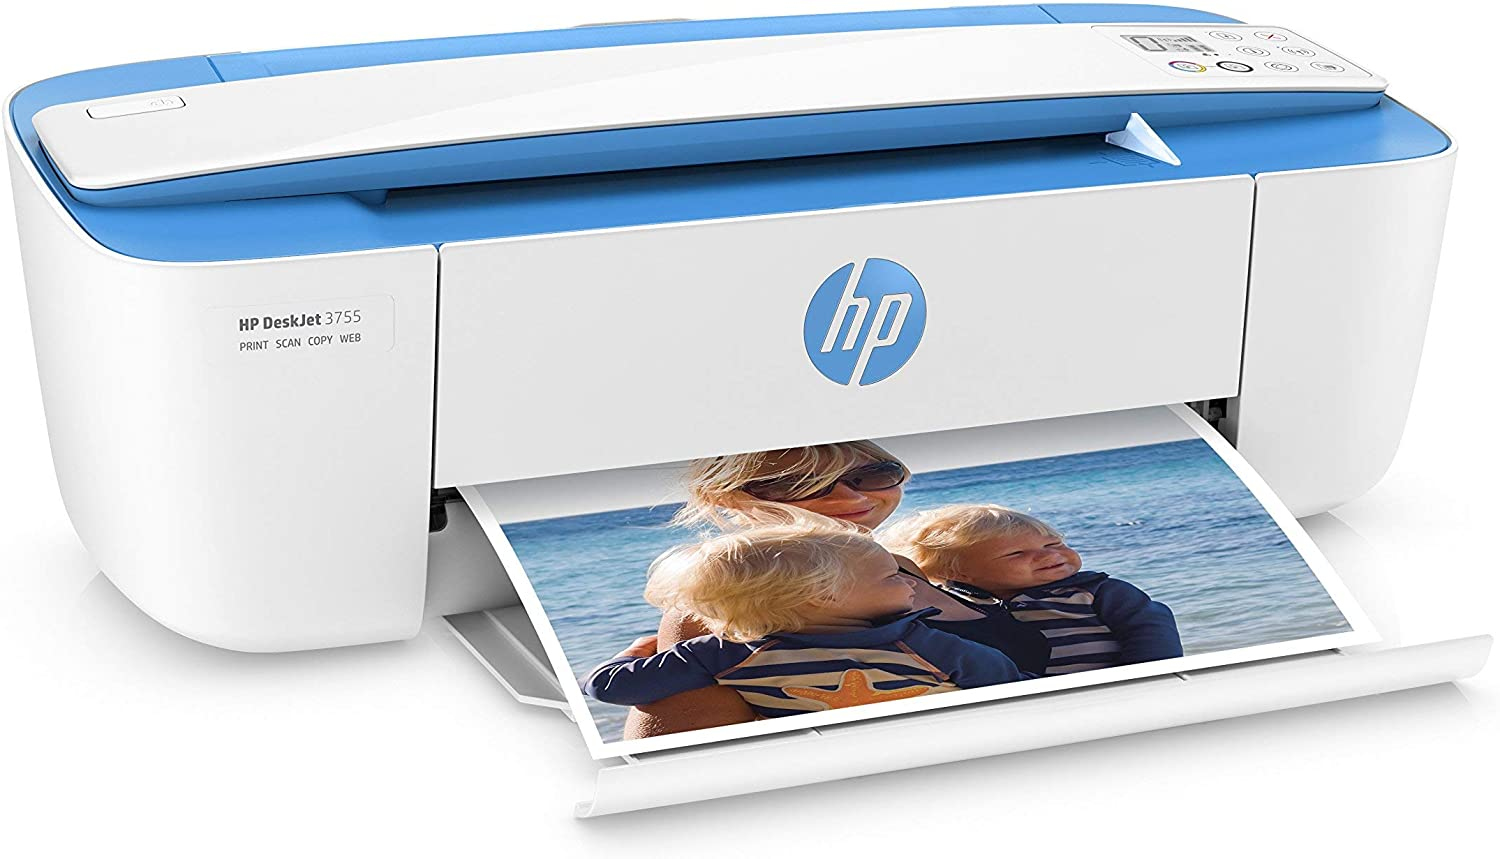 HP Deskjet 3755 Compact All-In-One Wireless Printer with Mobile Printing, HP Instant Ink & Amazon Dash Replenishment Ready - Blue Accent (J9V90A) (Renewed)